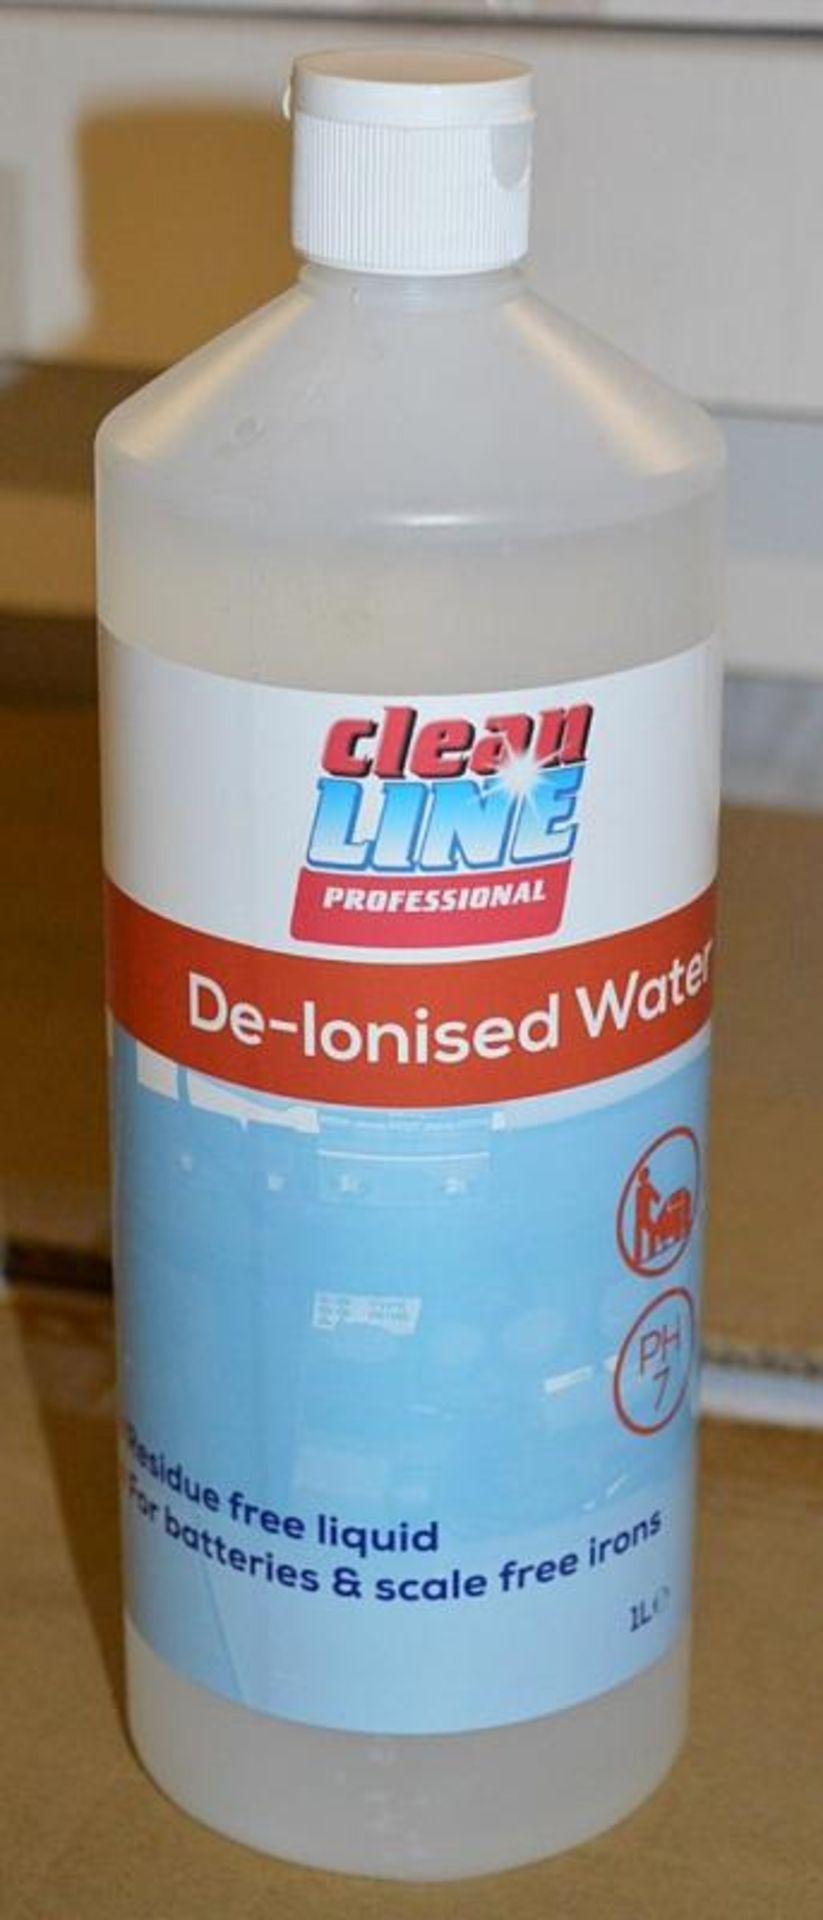 60 x 1-Litre Clean Line Professional Branded De-Ionised (Distilled) Water - New / Unused Stock -